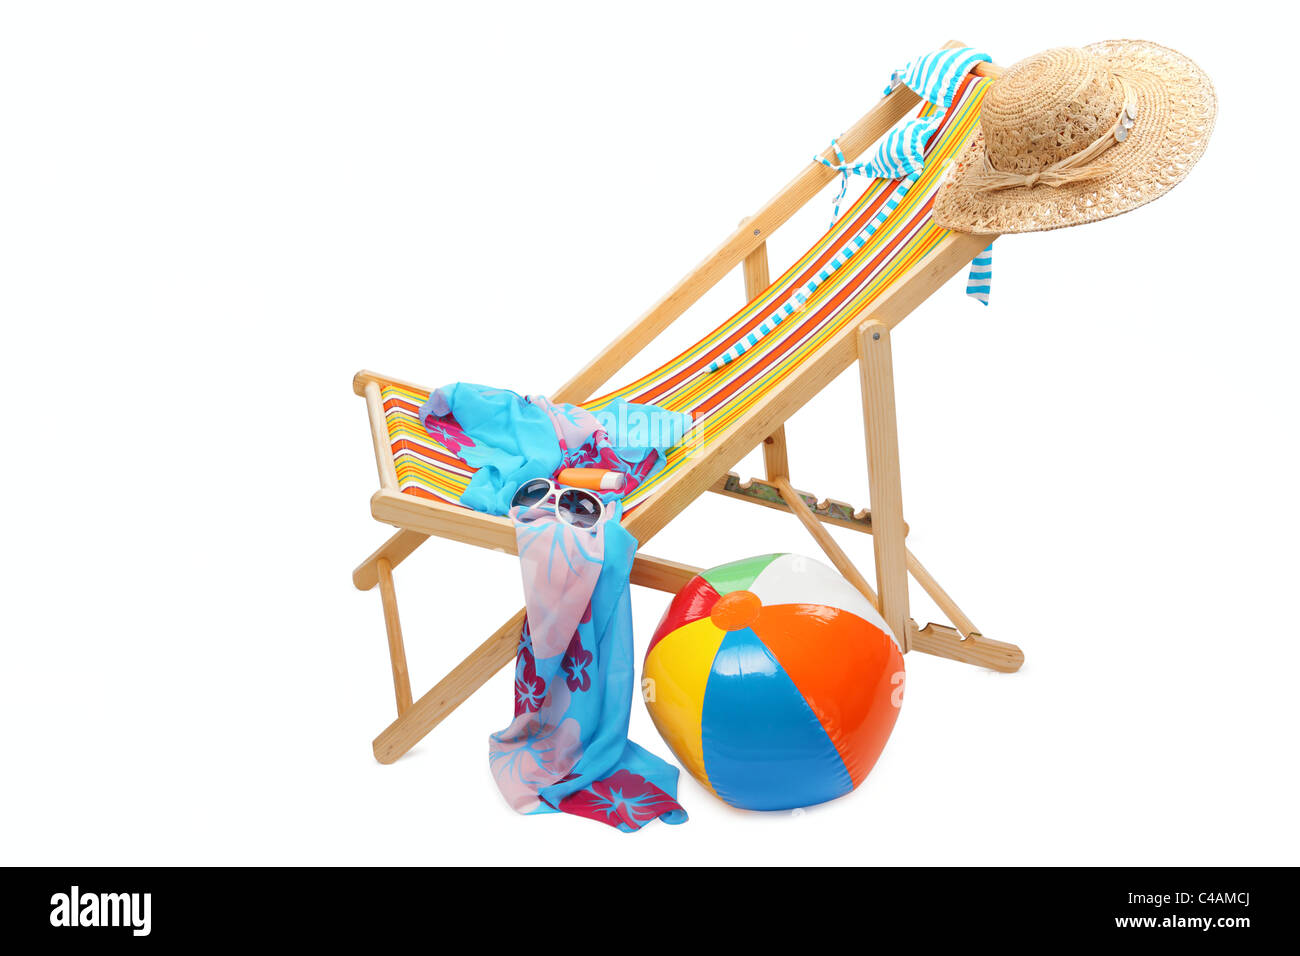 Deckchair and accessories isolated on white background. Stock Photo